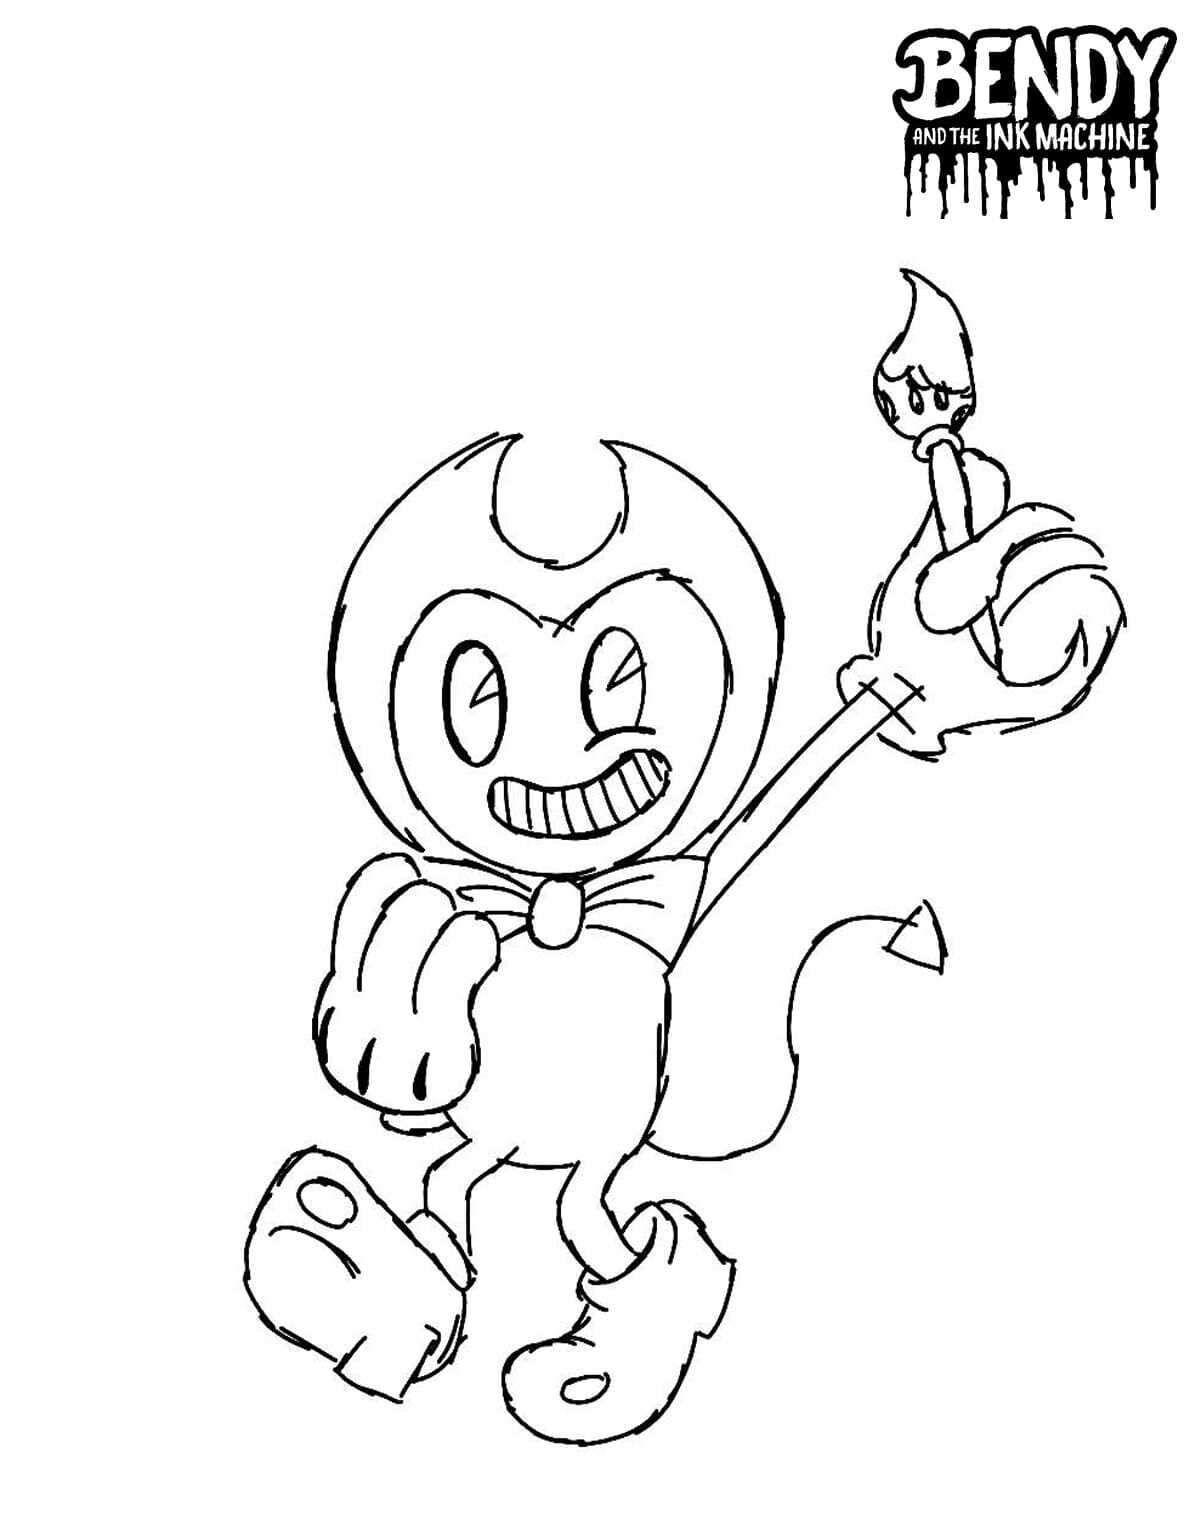 Bendy with tassel winkles his eye from Bendy and the Ink Machine Coloring Pages